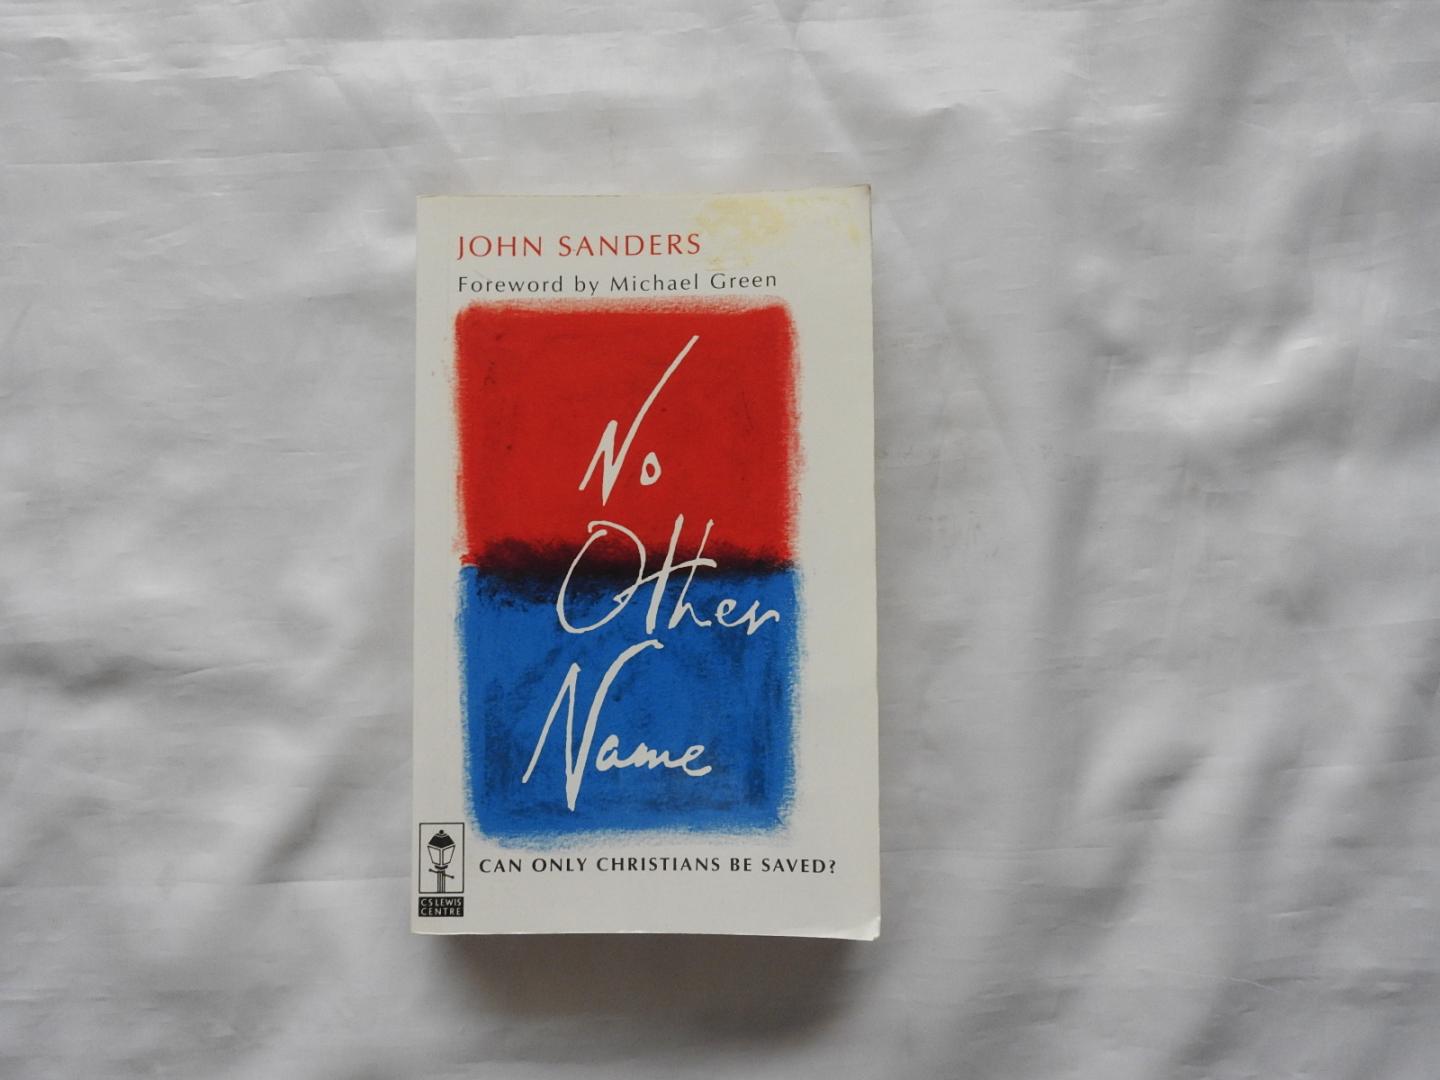 Sanders John J. - M GREEN - no other name - CAN ONLY CHRISTIANS BE SAVED